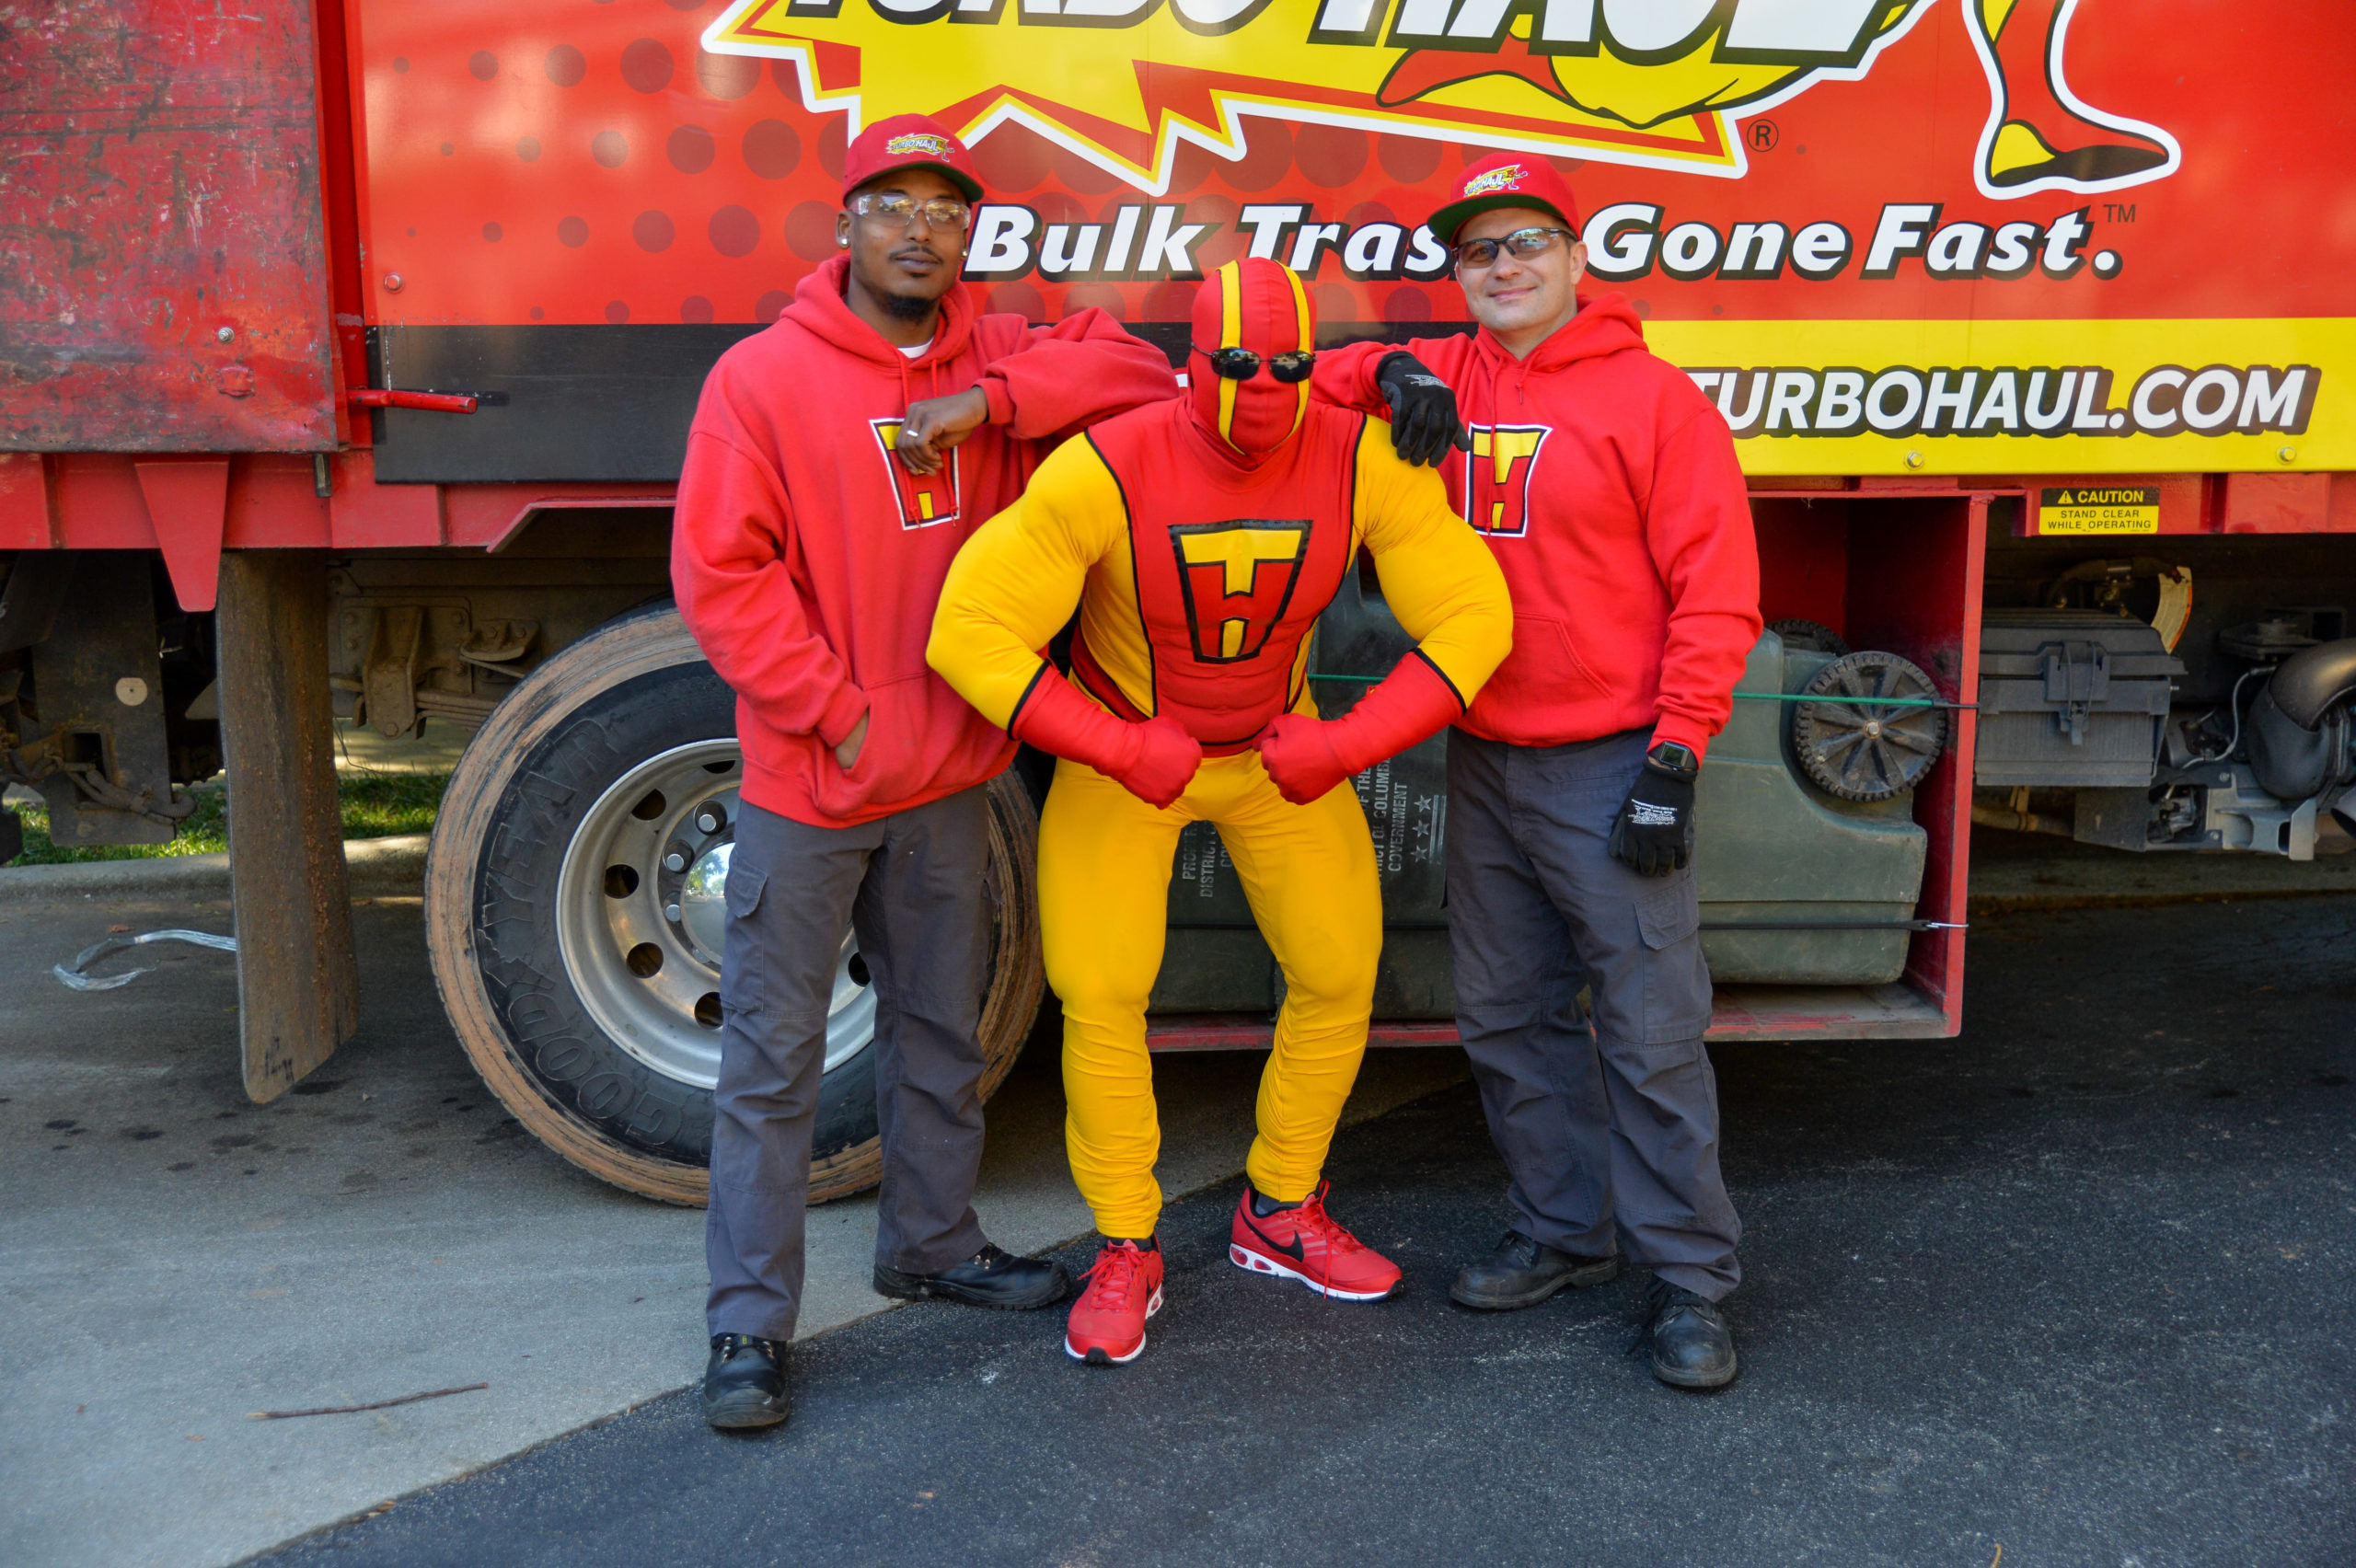 Two junk removal specialists pose with TurboHaul Man in Linthicum, MD